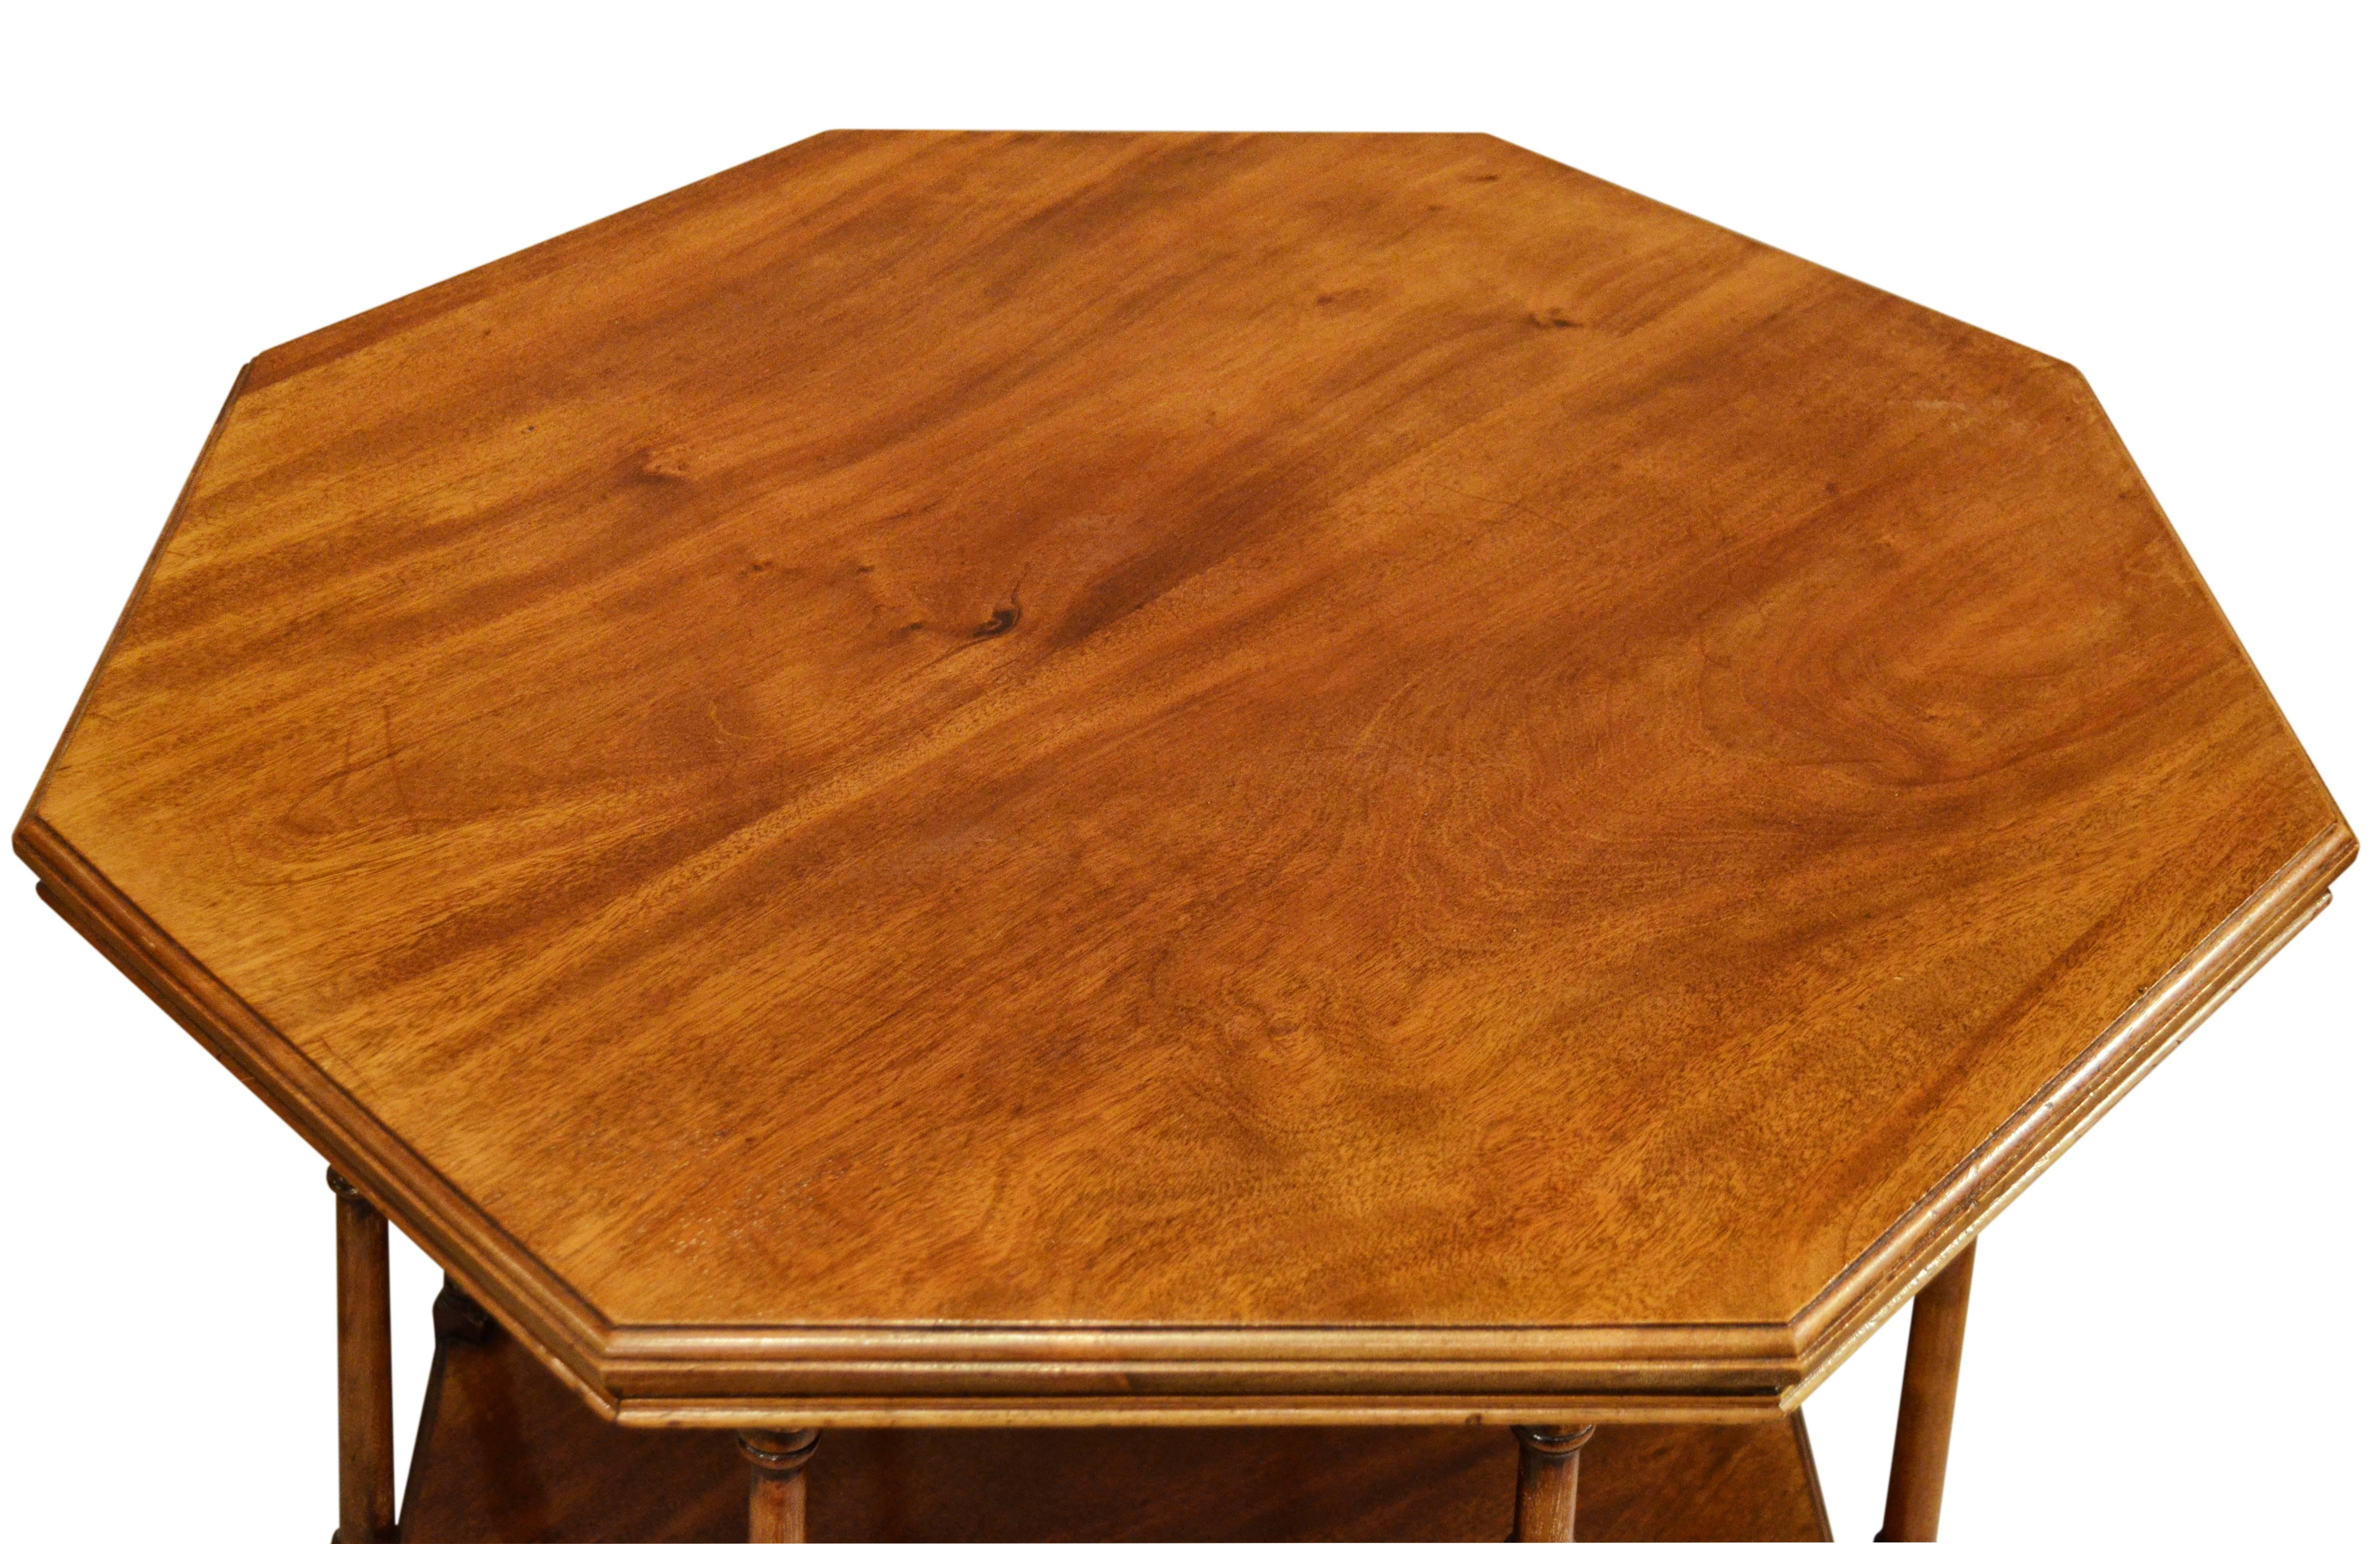 A late 19th century Aesthetic Movement mahogany centre table in the manner of E.W.Godwin, circa 1880.